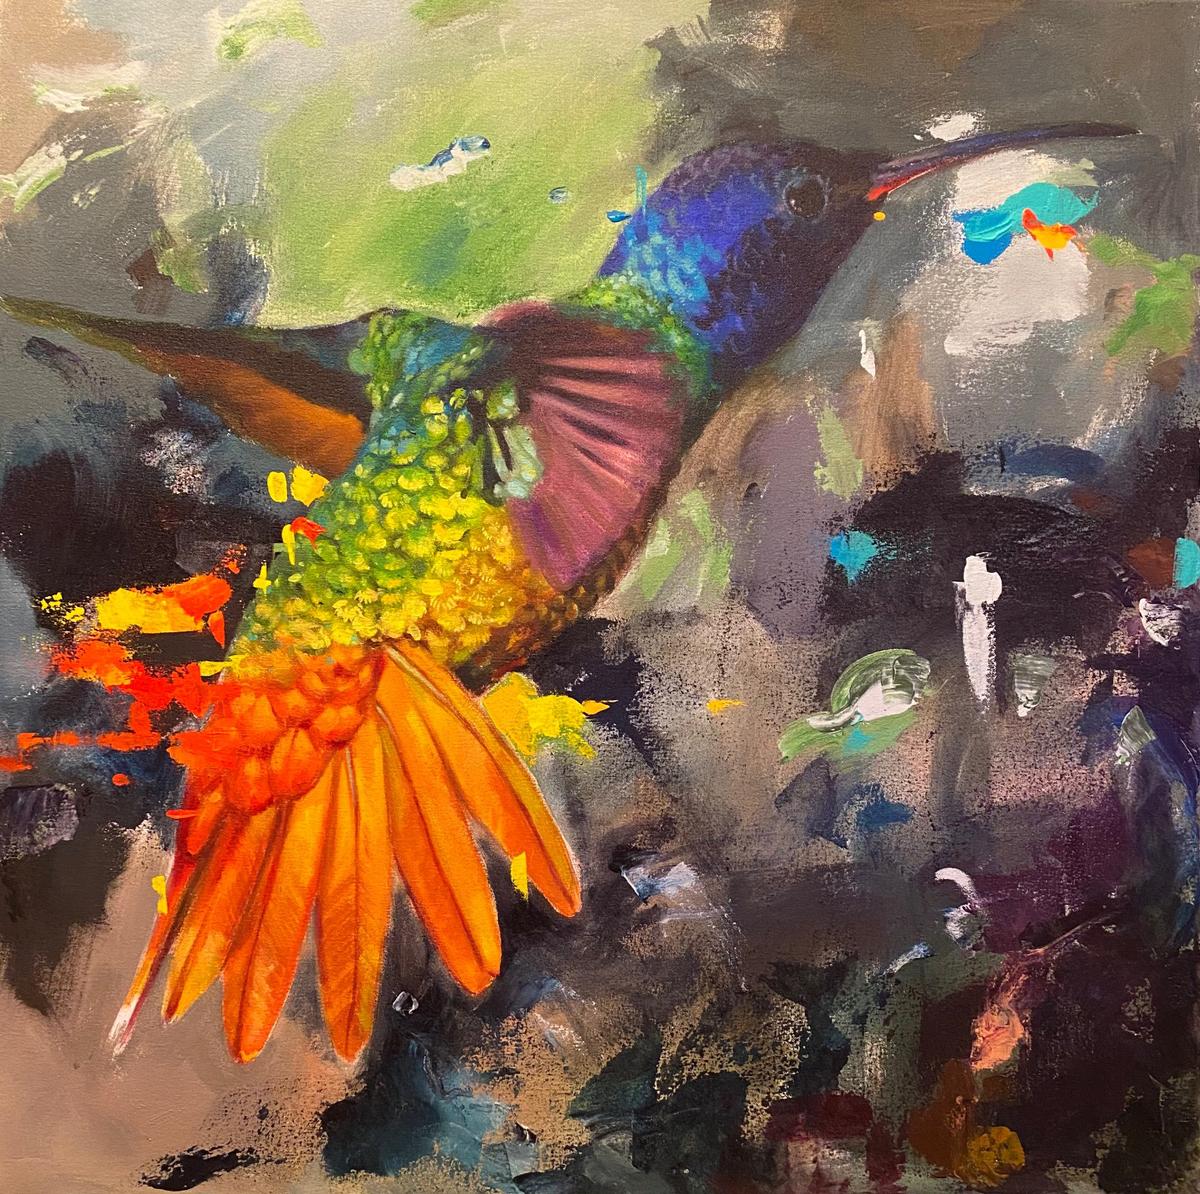 House of Milk - contemporary hummingbird colourful acrylic painting - Painting by Keng Wai Lee